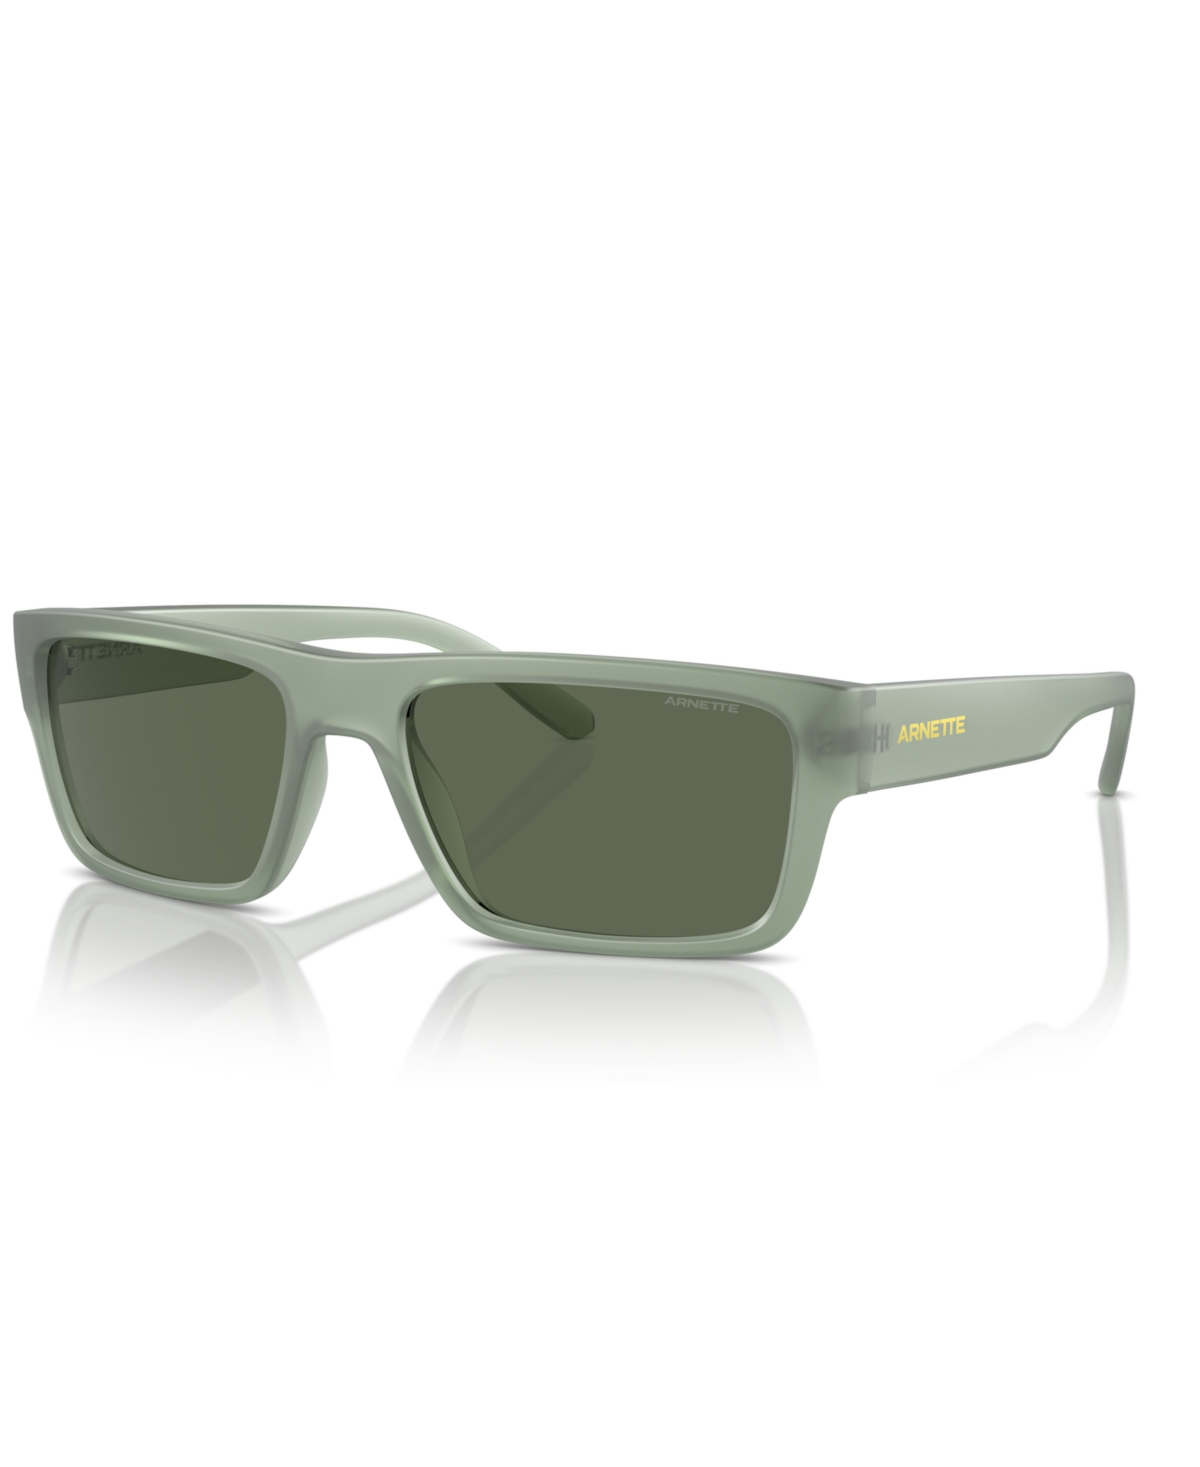 Arnette Men's Sunglasses, Phoxer An4338 In Frosted Sage